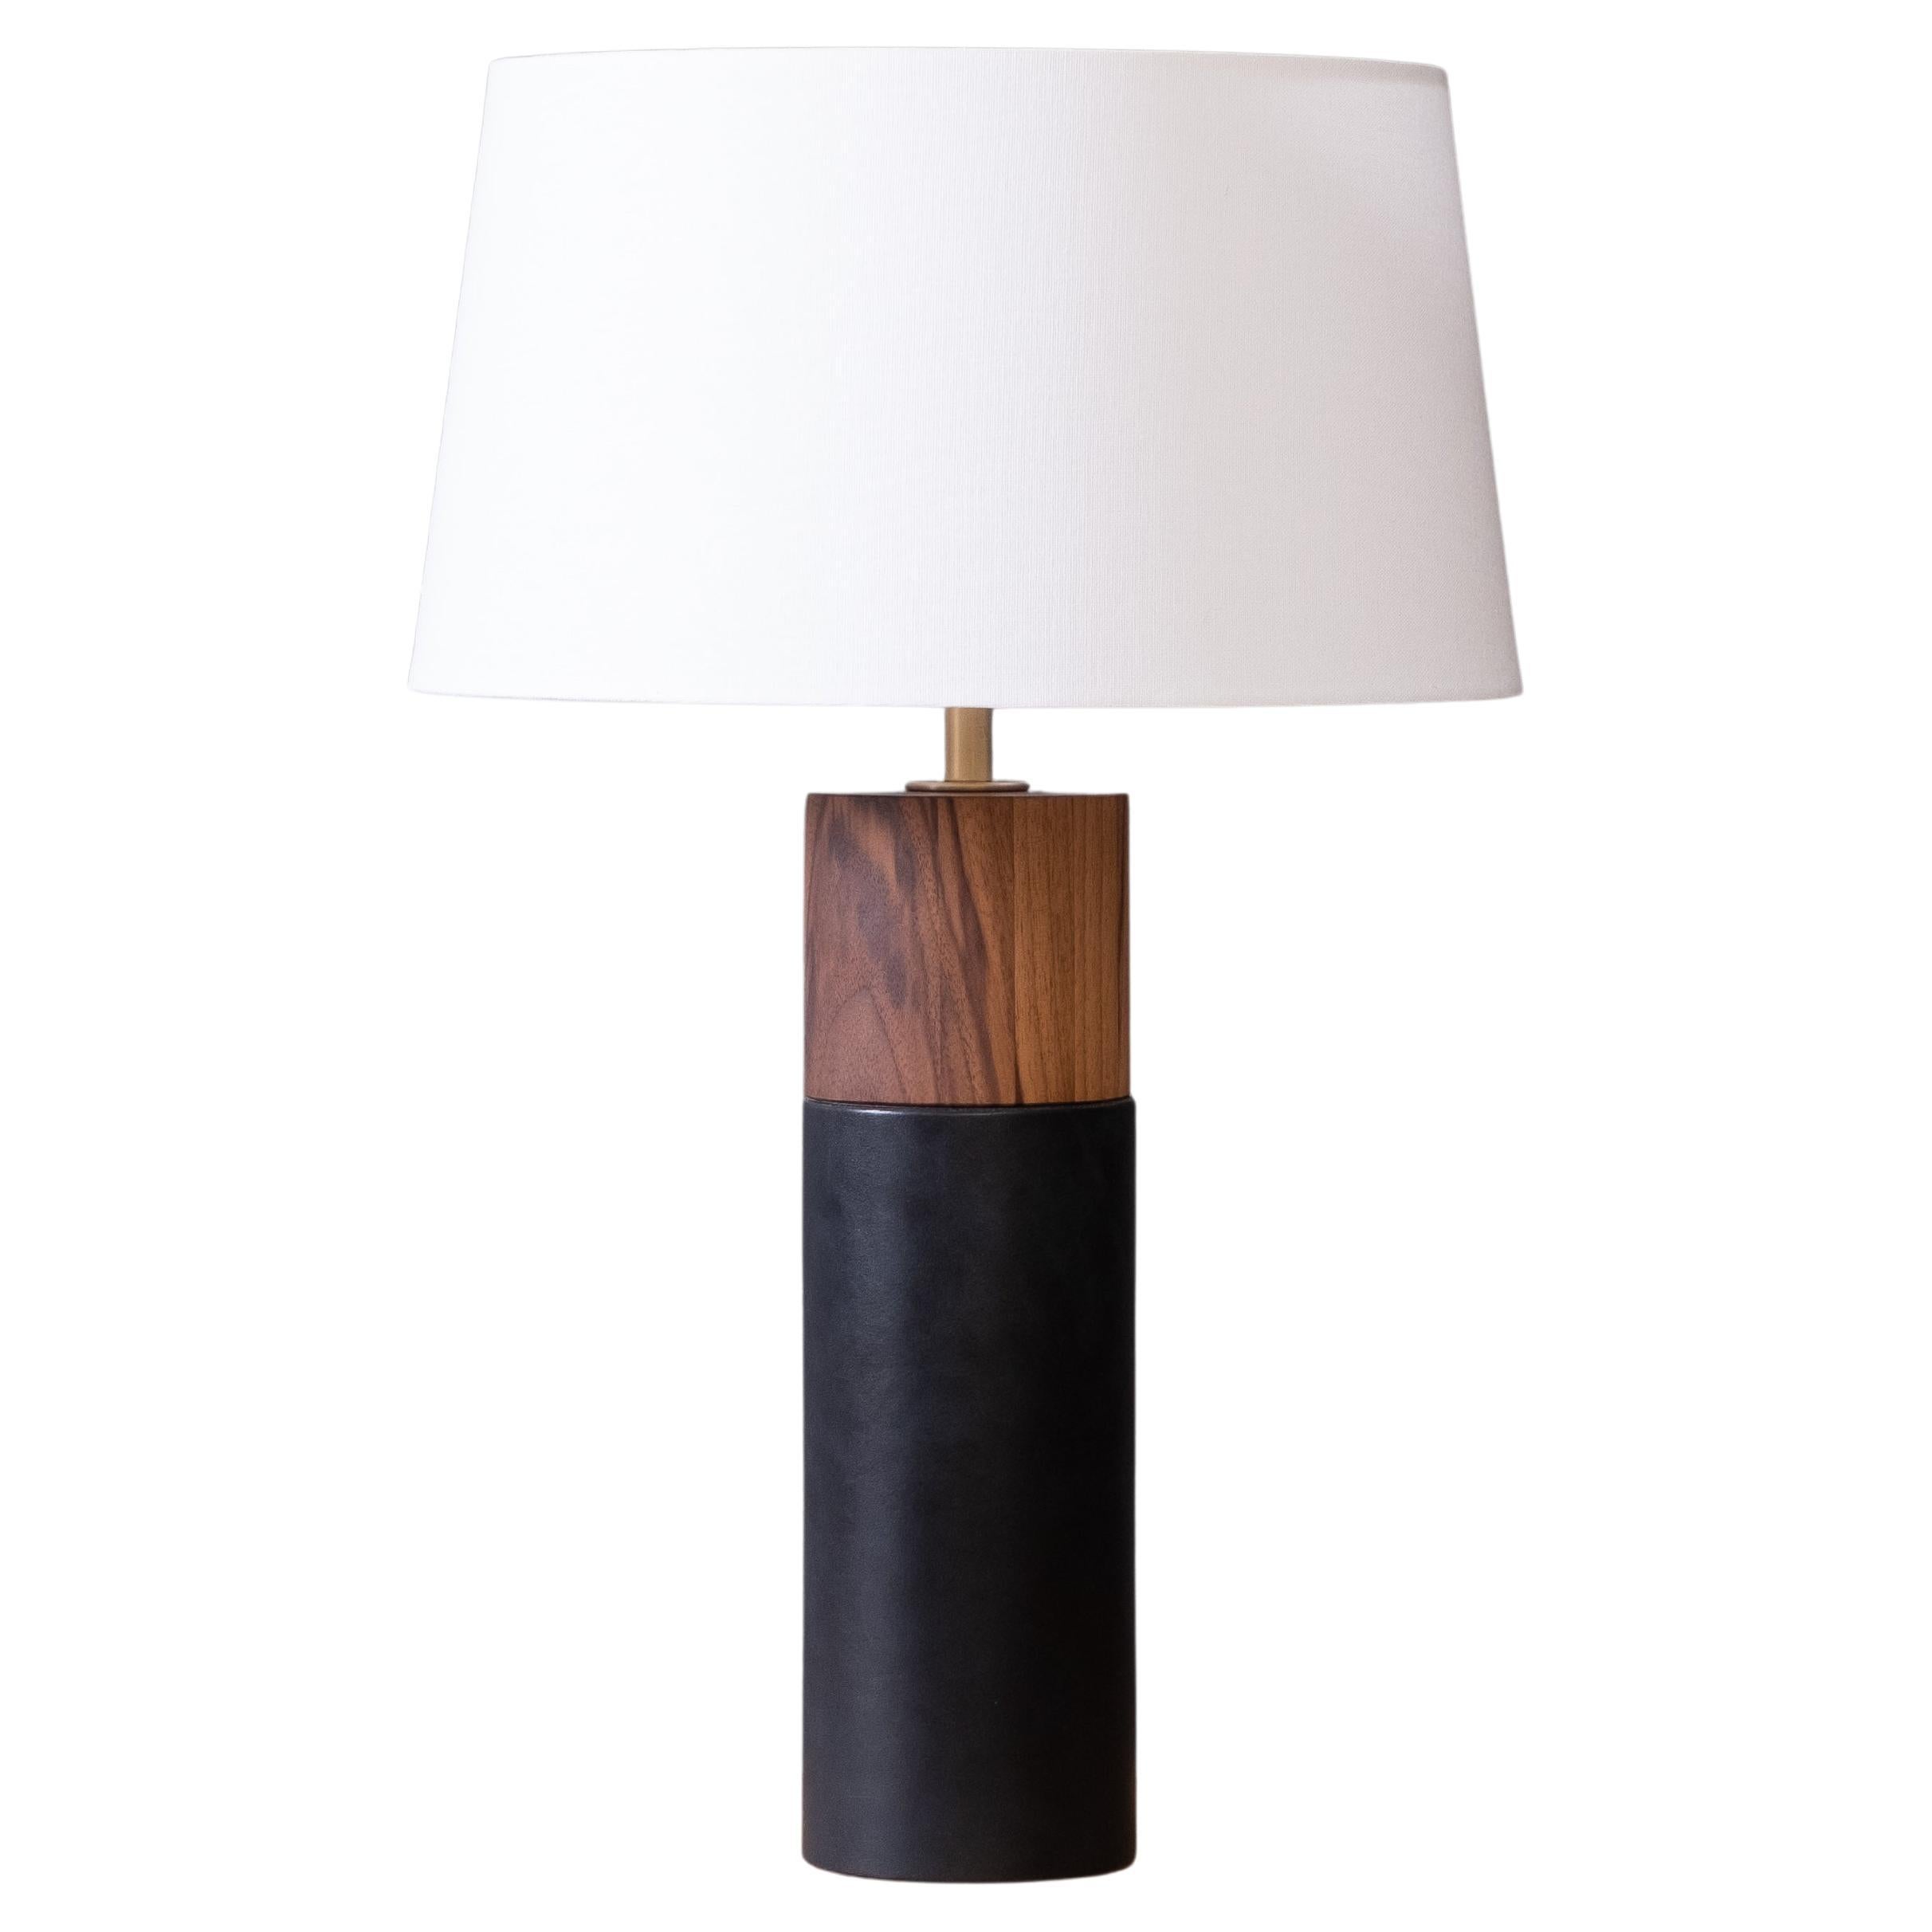 Minimalist Table Lamp with Leather-Wrapped Cylindrical Walnut Base